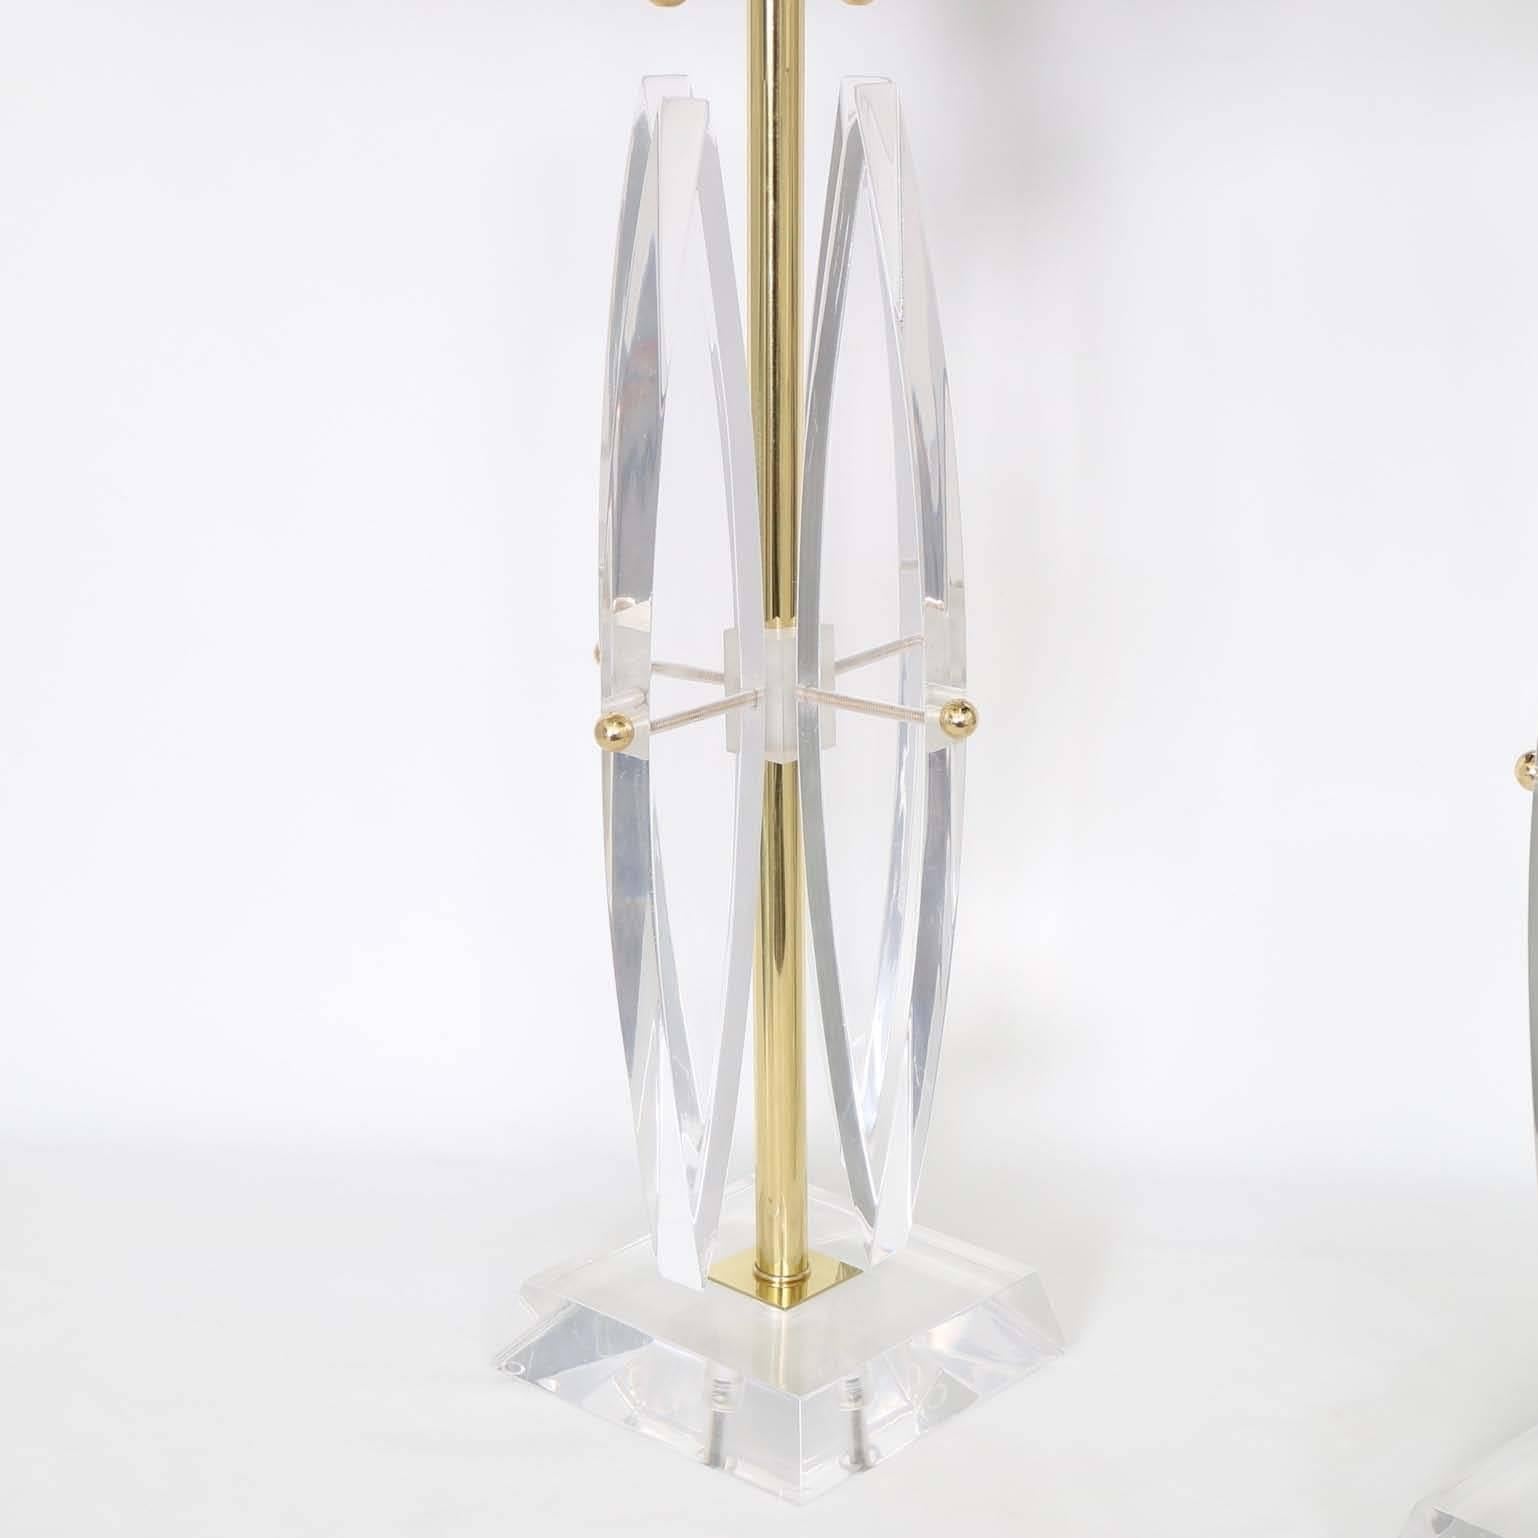 A pair of spectacular Lucite Astrolite lamps, produced circa 1950s by Ritts Company, with brass accents. The noted height is to the finial, the height to the top of the Lucite body measures 22″. These lamps remain in excellent vintage condition,